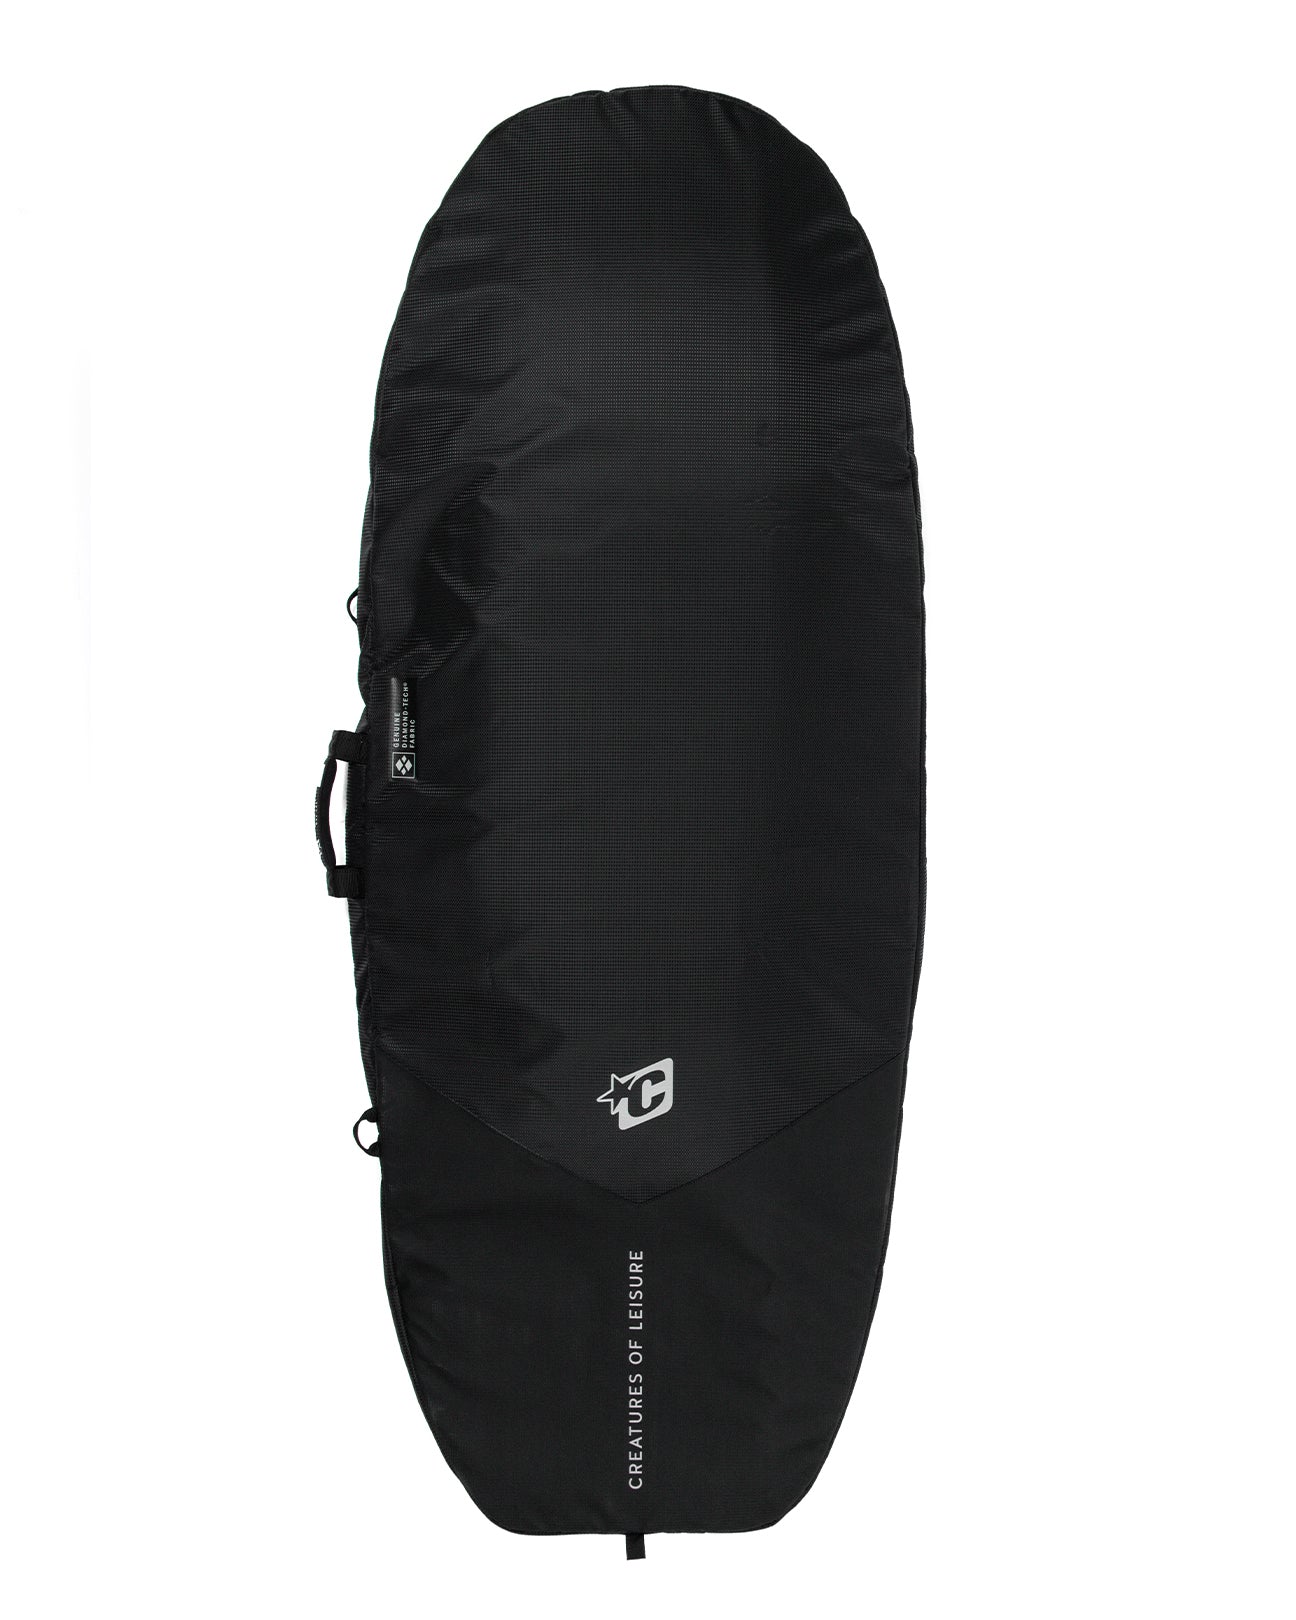 Day Use Surfboard Bags – Creatures of Leisure USA